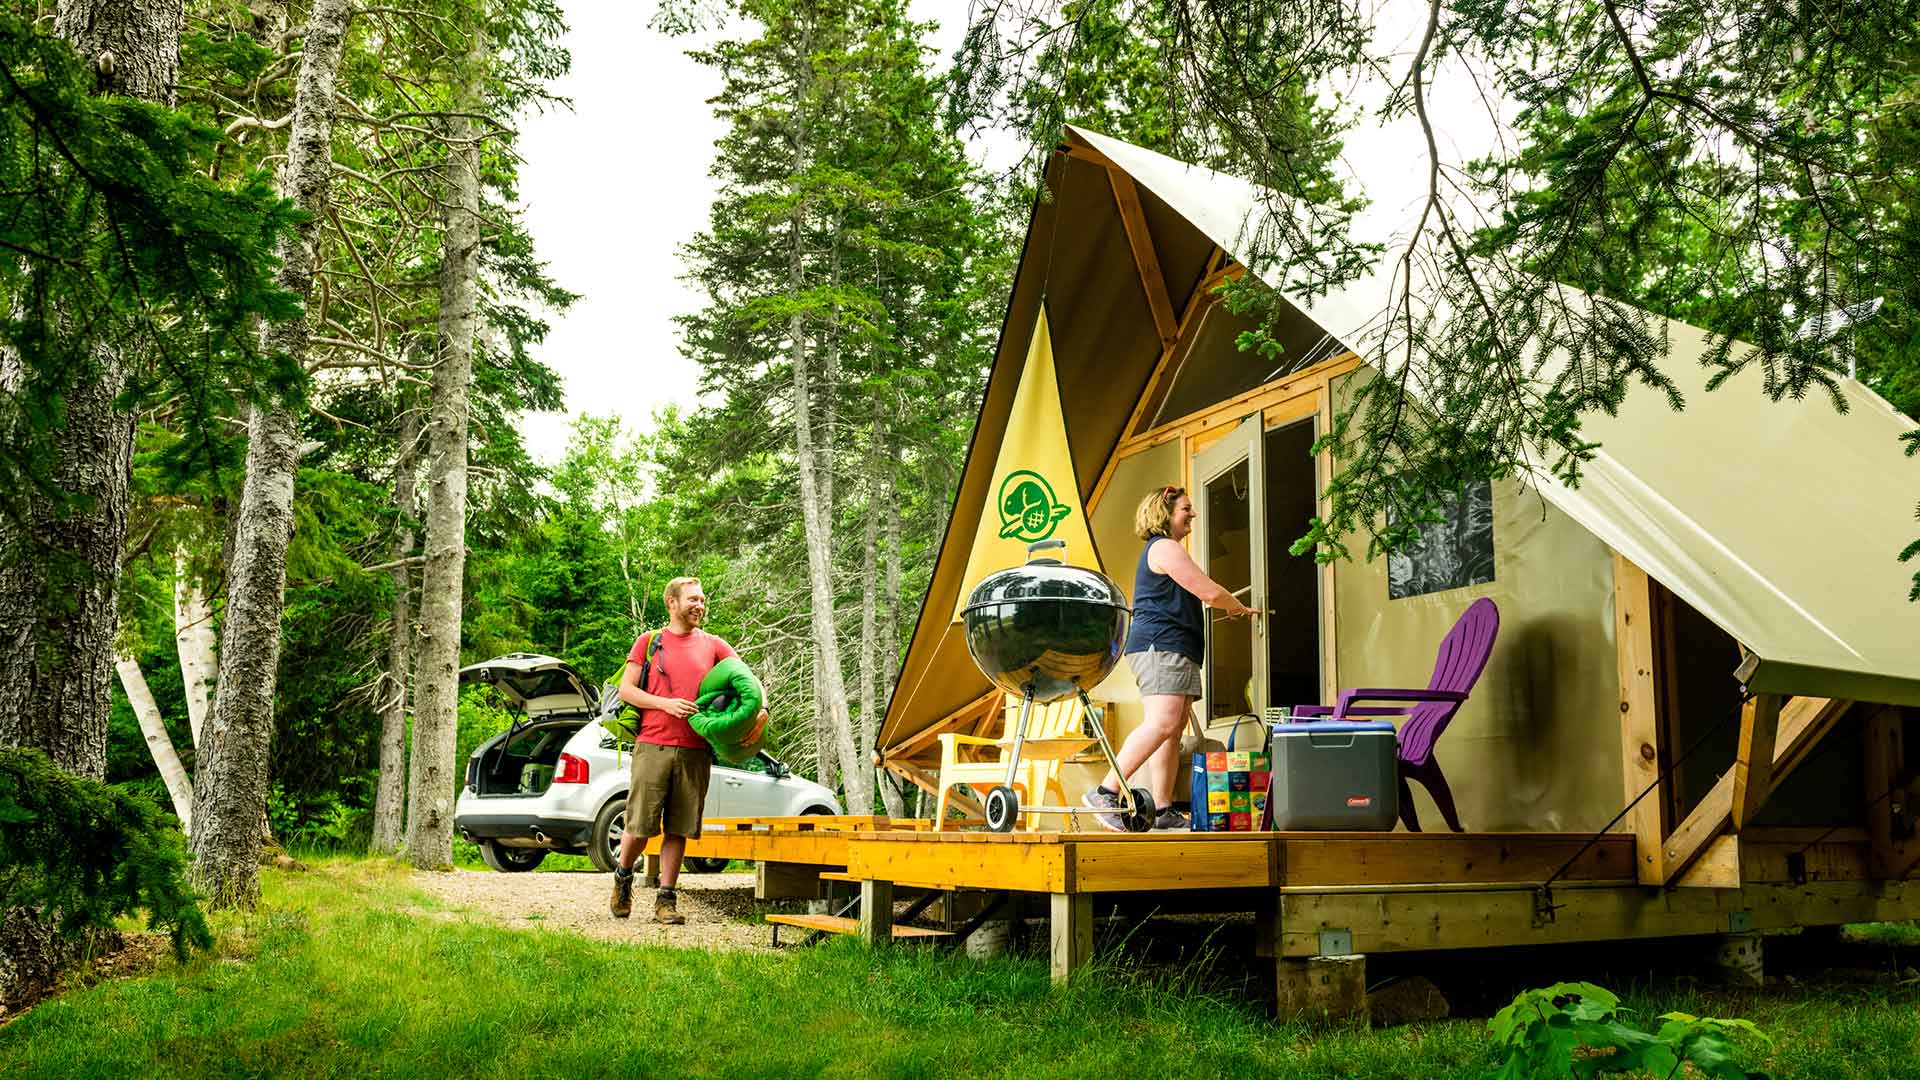 Parks Canada oTENTik in one of the Cape Breton Highlands National Park campgrounds in Nova Scotia